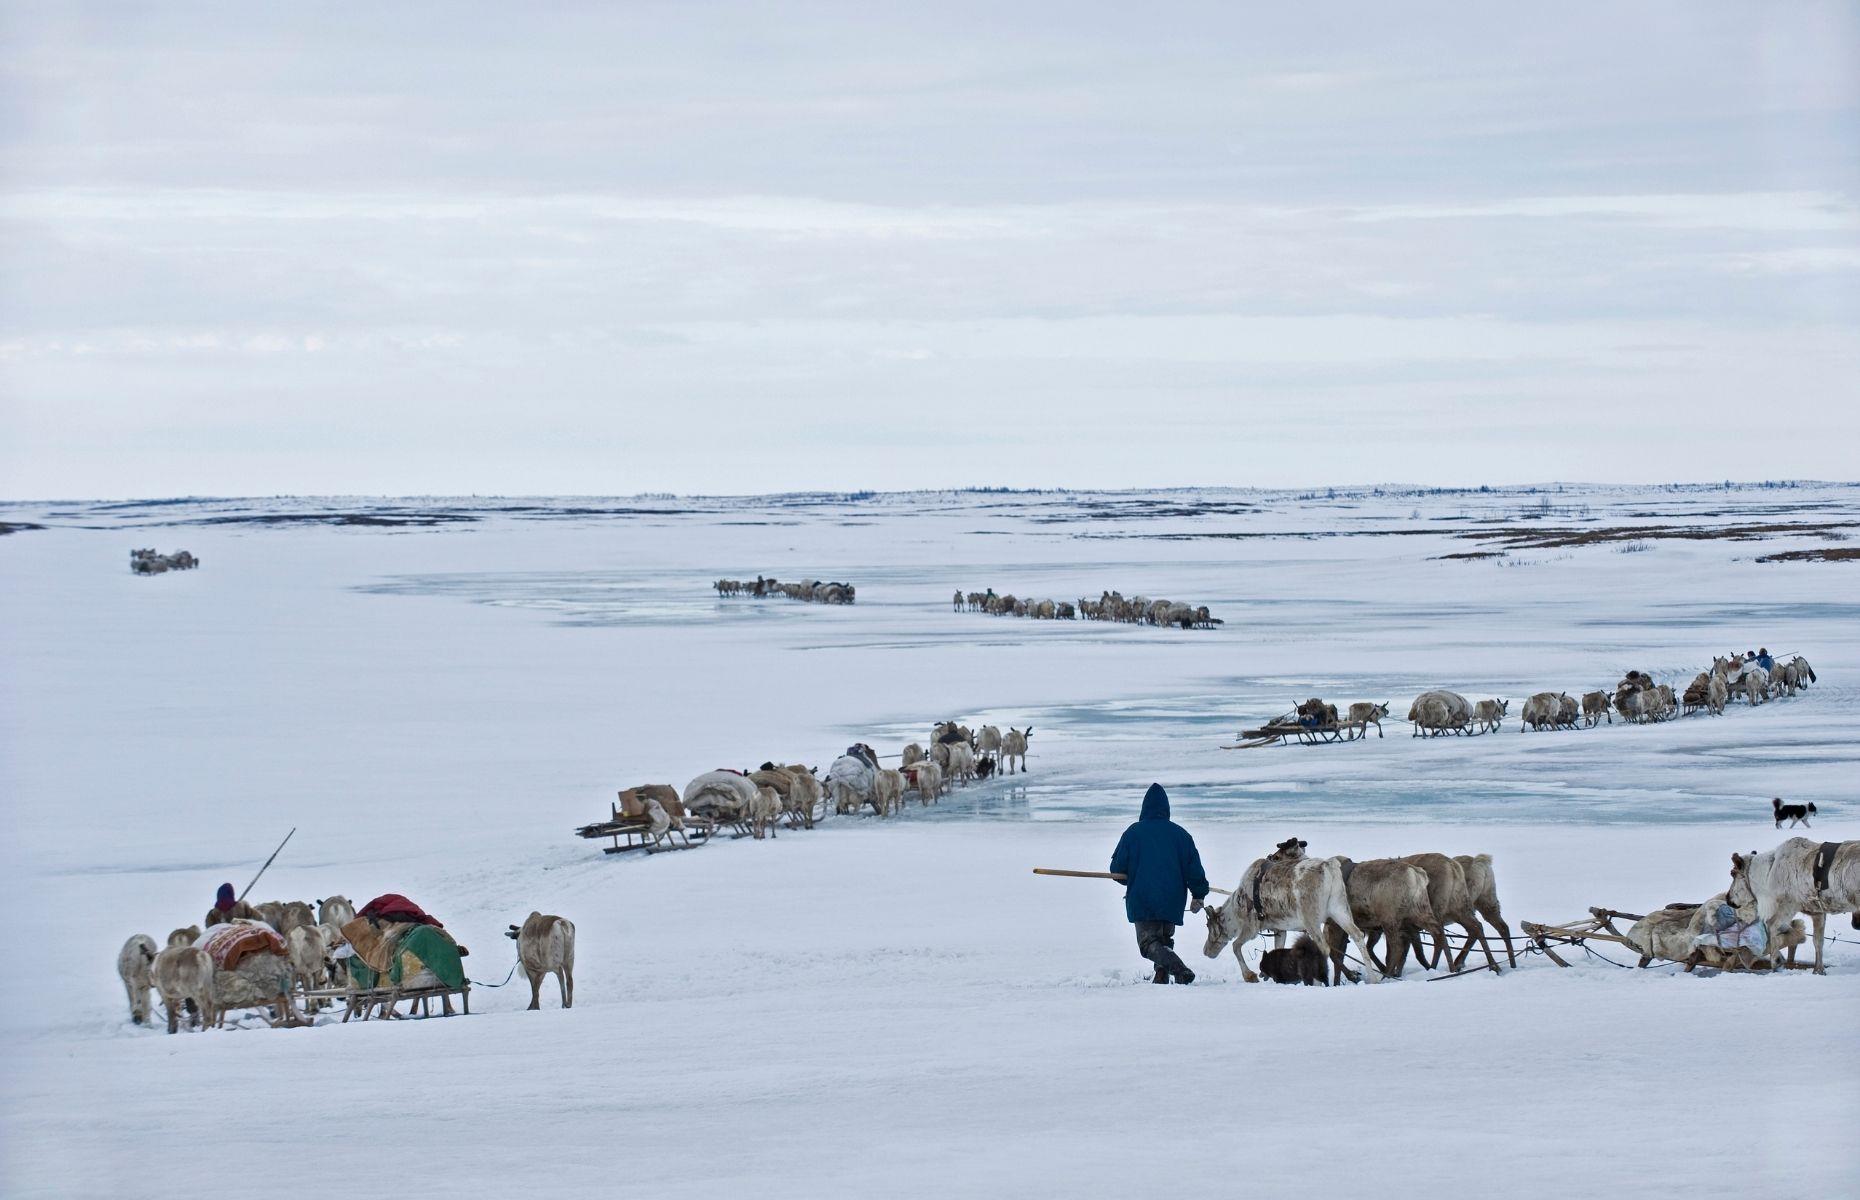 <p>Imagine spending your days in a climate that can drop to as low as −50°C (−58°F). Well, for thousands of years the Nenets have travelled across unimaginable landscapes in search of grazing grounds. But now their way of life is under threat, due in part to the climate crisis and the discovery of oil.</p>